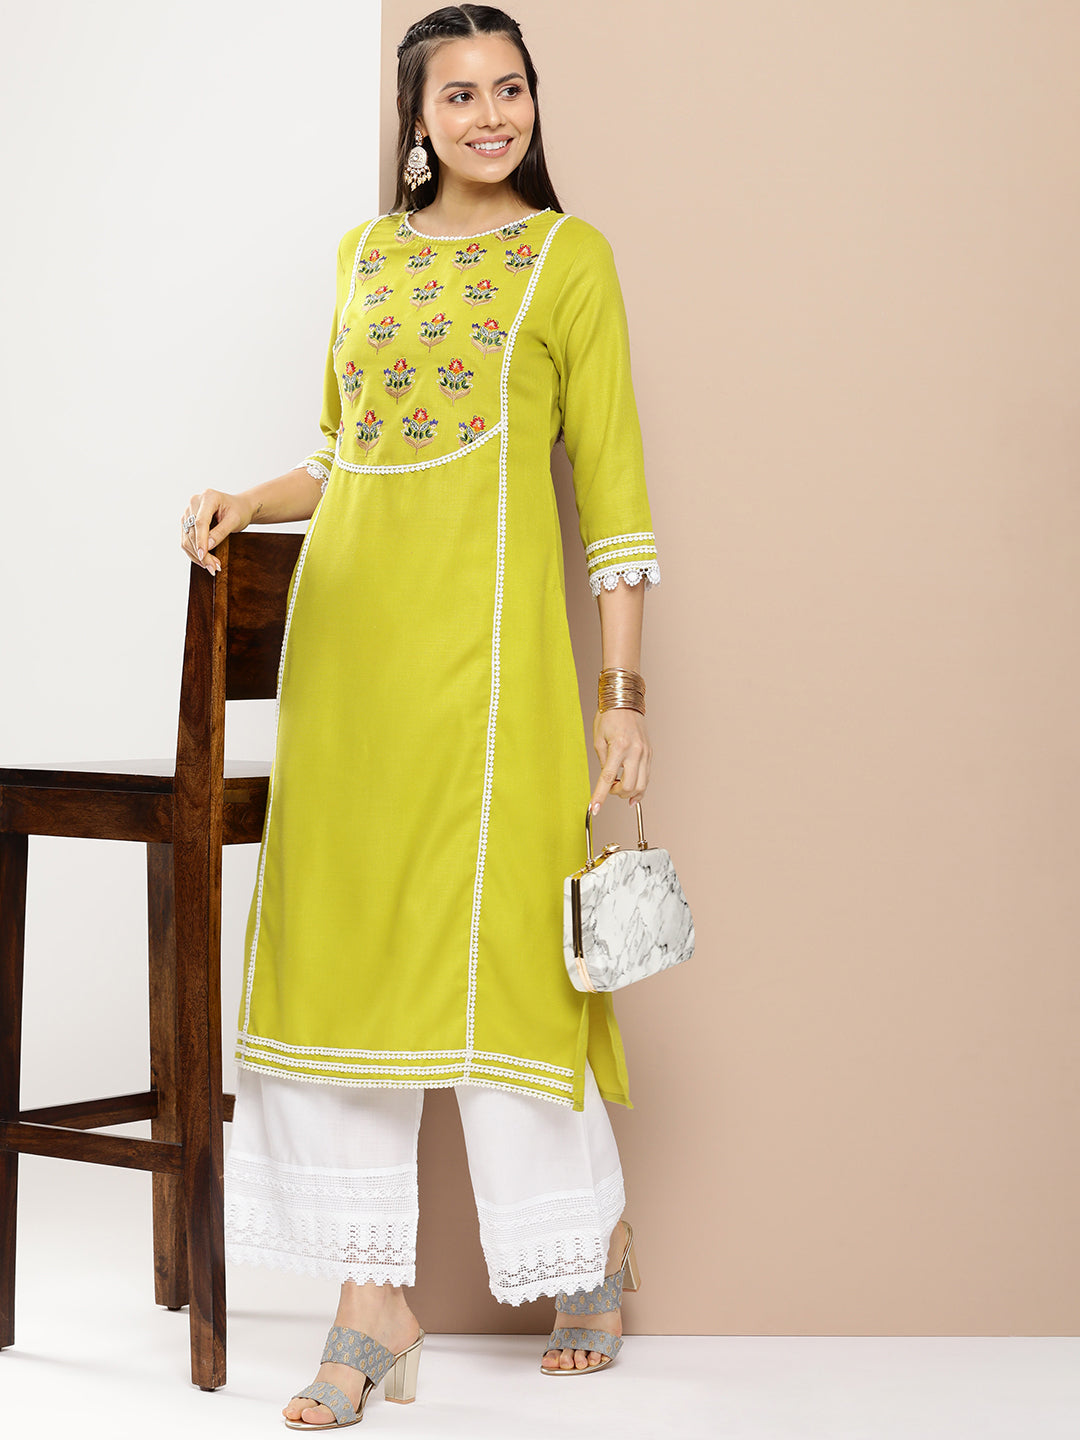 Women's Green And Red Yoke Design Kurta With Lace Details & Off White Palazzos - Bhama Couture